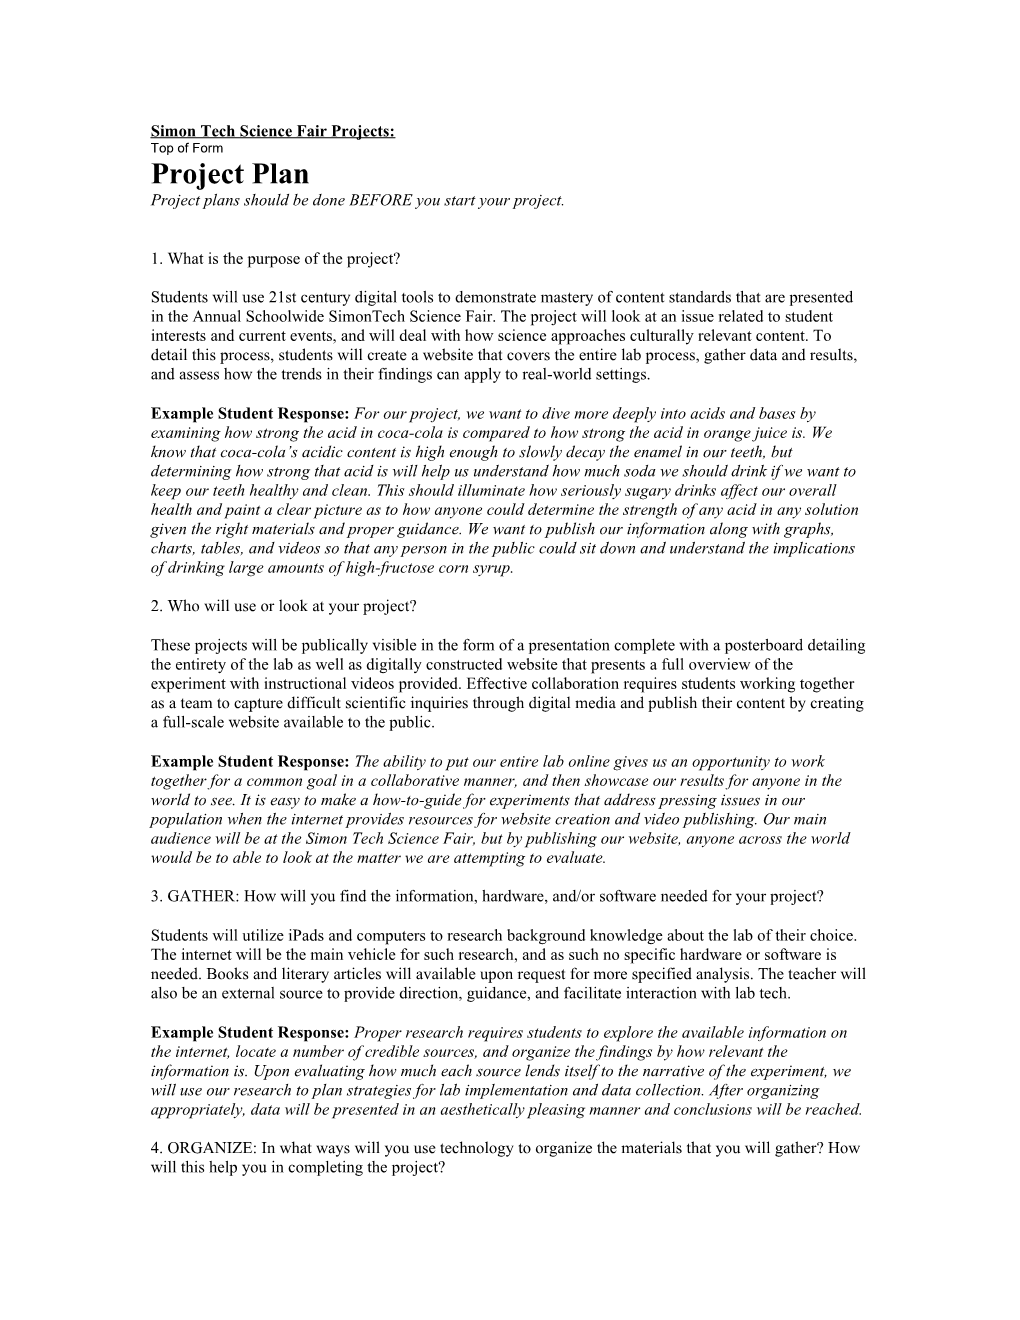 Simon Tech Science Fair Projects: Top of Form Project Plan Project Plans Should Be Done